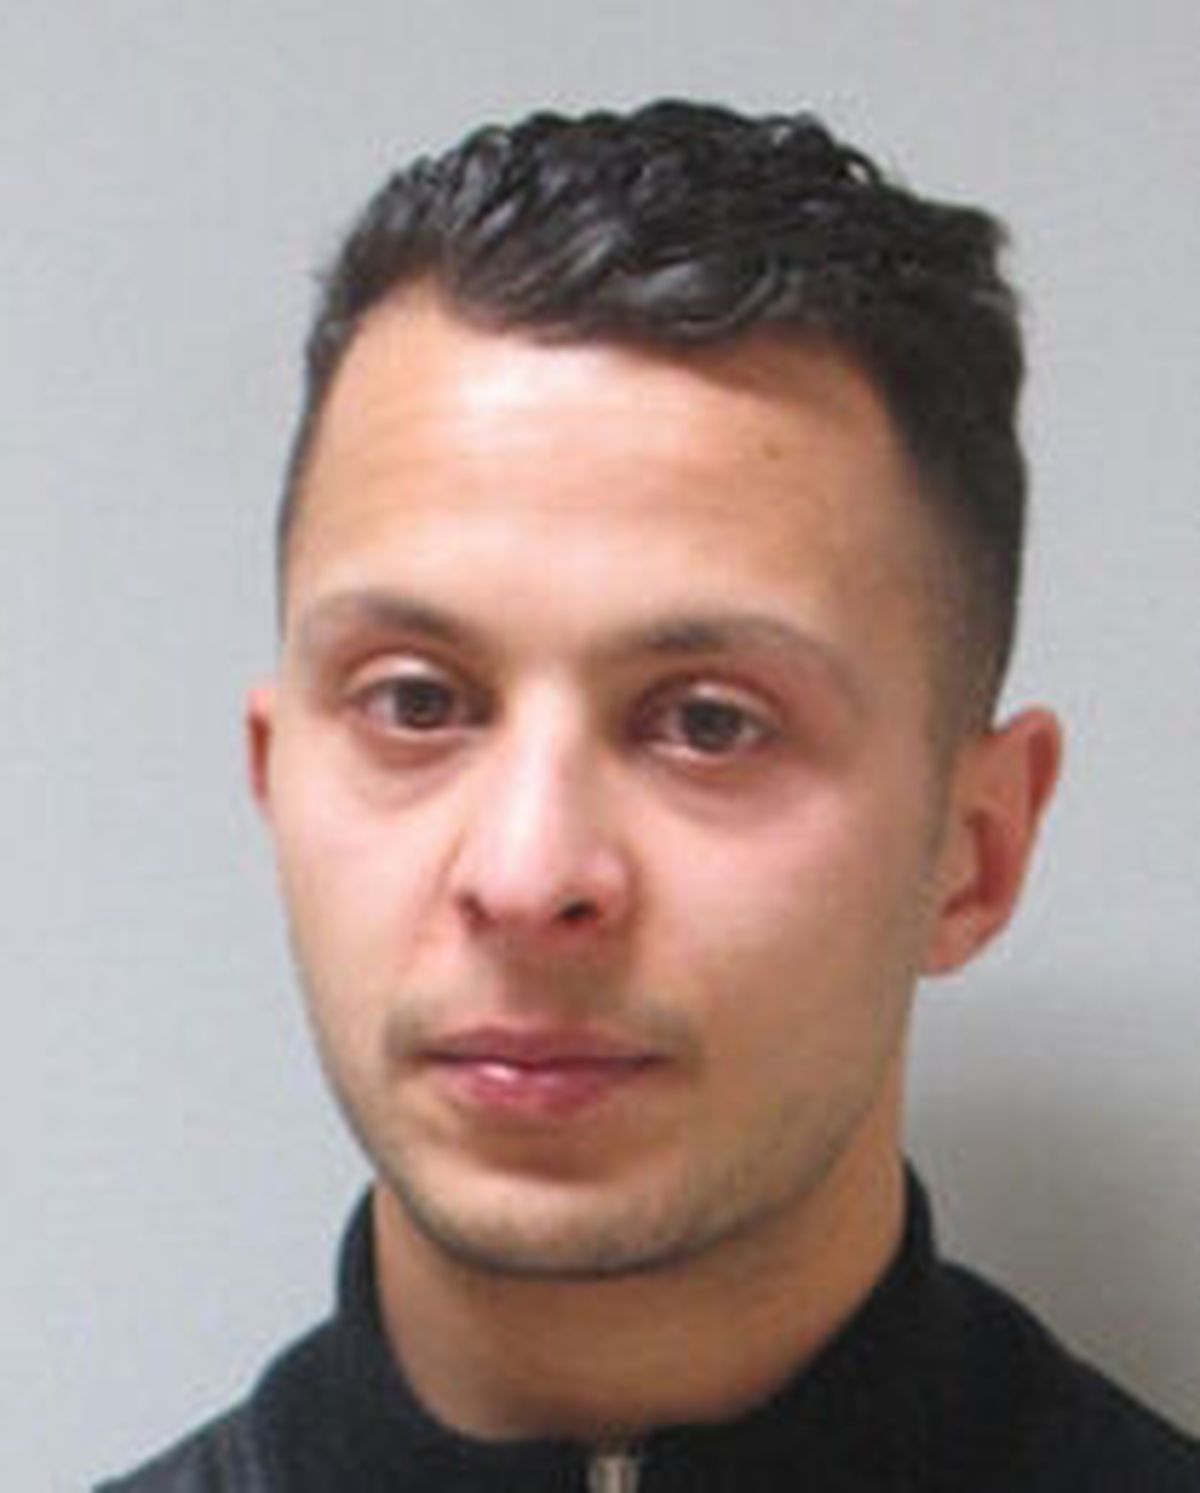 FILE - This is a an undated handout image made available by Belgium Federal Police of Salah Abdeslam who was wanted in connection to the attacks in Paris on Nov. 13, 2015. The last surviving suspect from the 2015 Paris attacks has told a court he felt "ashamed" after failing to detonate his suicide vest on the bloody night of Nov. 13.  (HOGP)